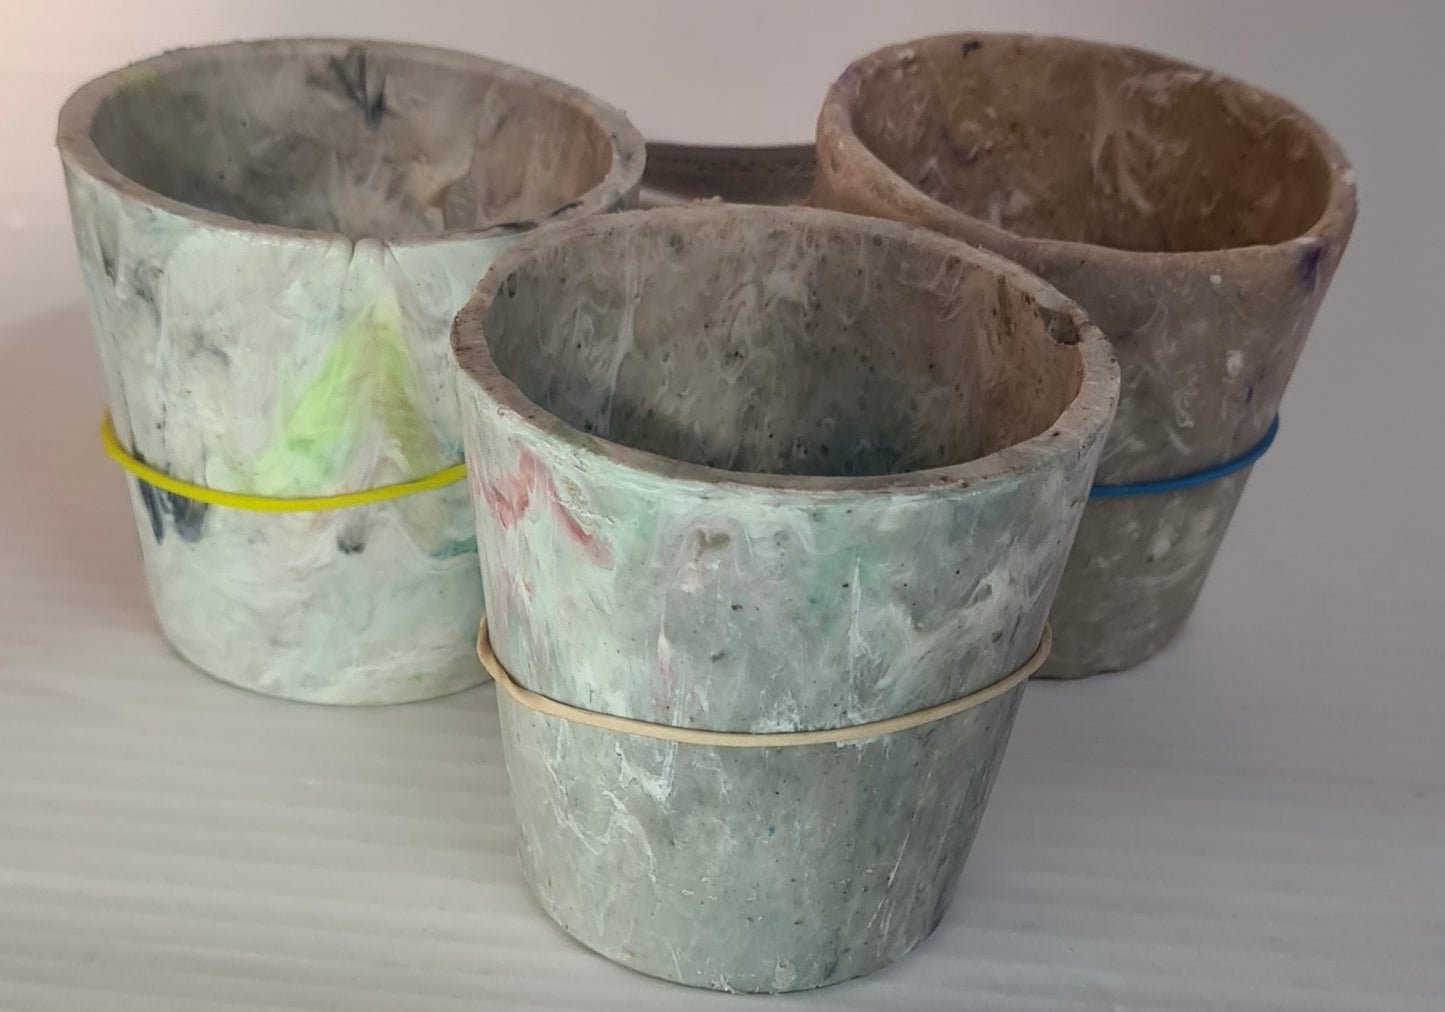 Pots- recycled plastic